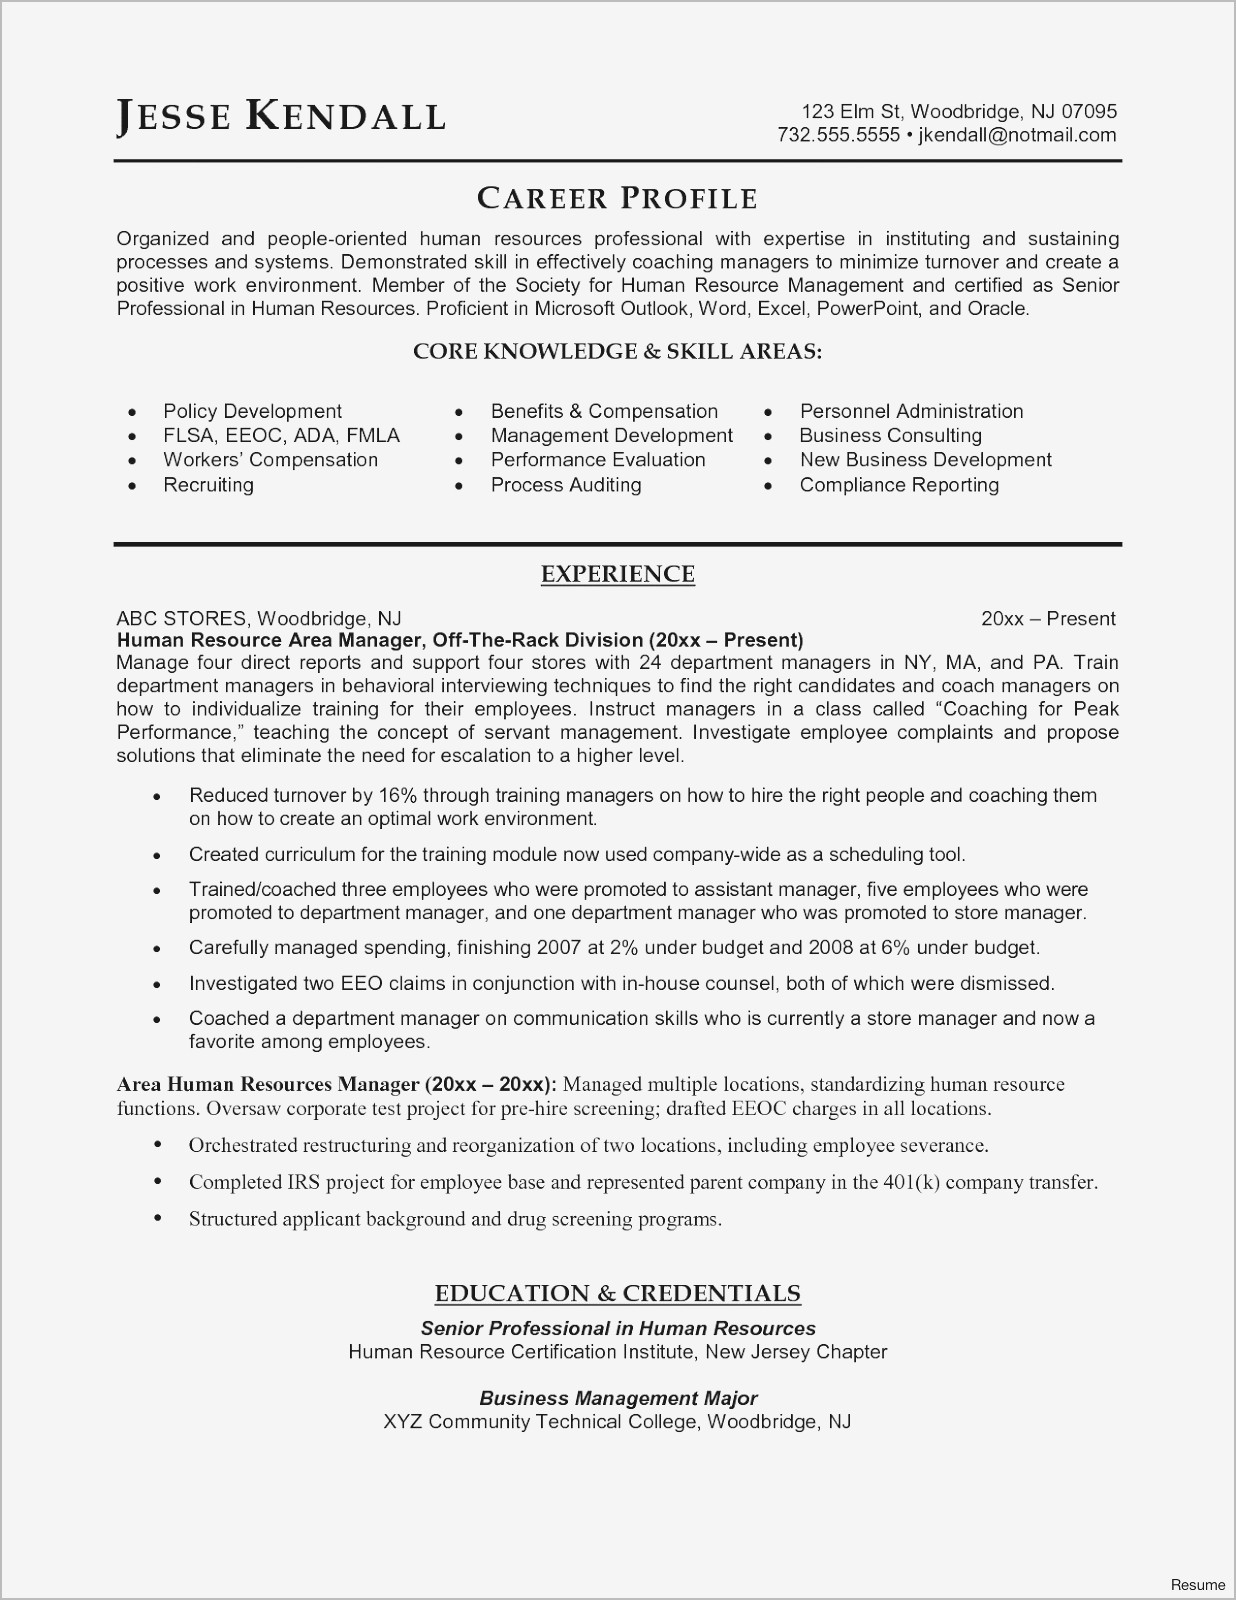 letter to irs template example-Resume Cover Letter Templates Awesome Resume Template Microsoft Word Professional Job Resume Template Od 7-p